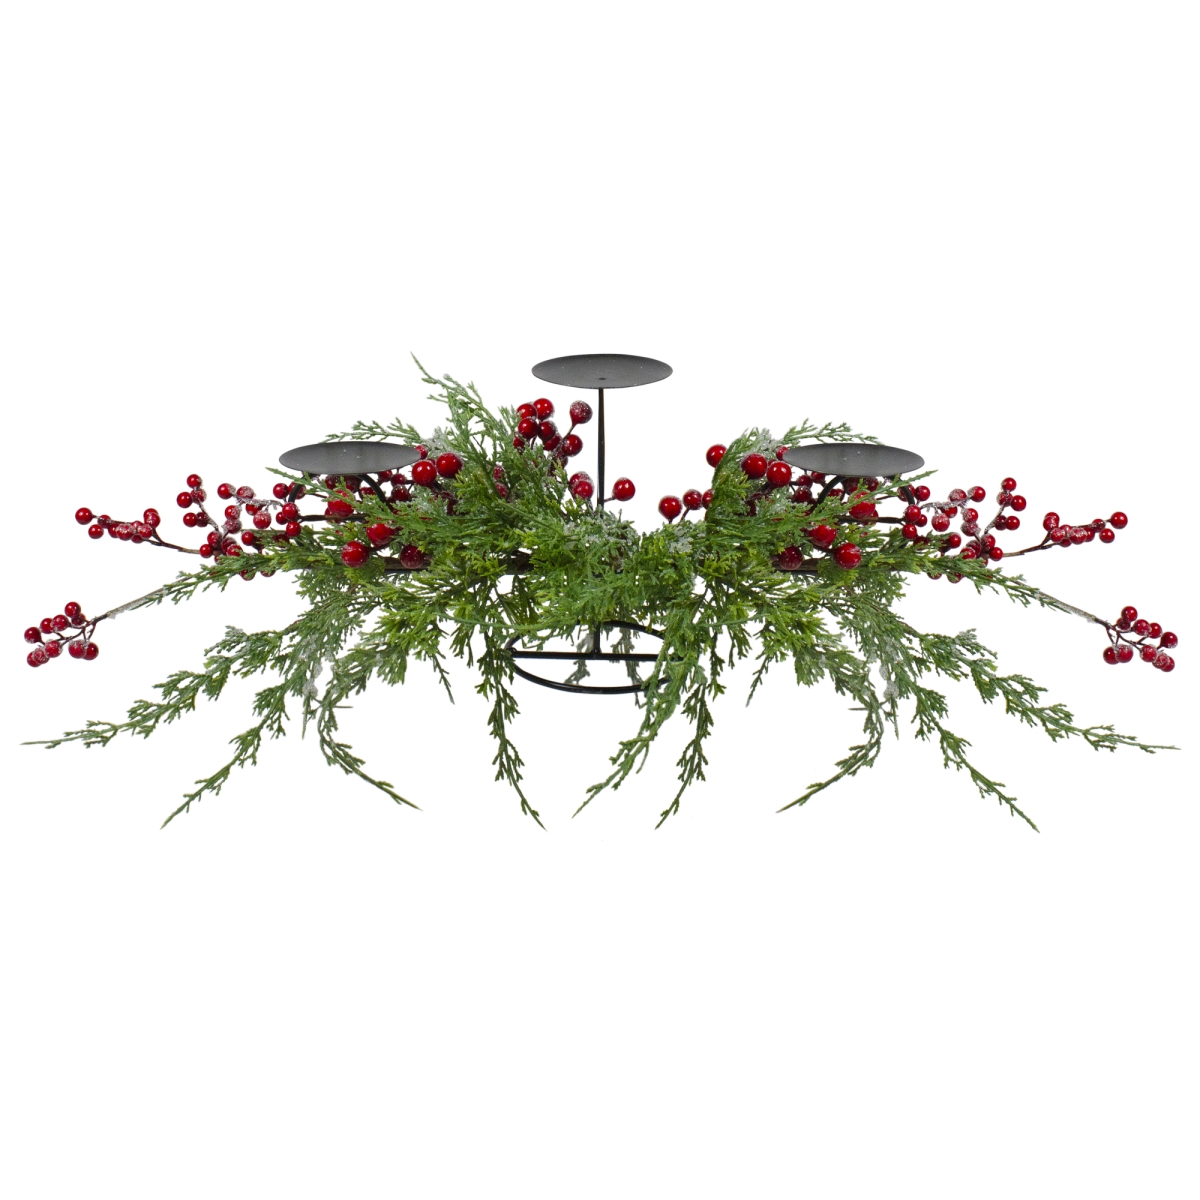 Picture of NorthLight 34316651 32 in. Berry Candle Holder Christmas Tabletop Decor, Frosted Red